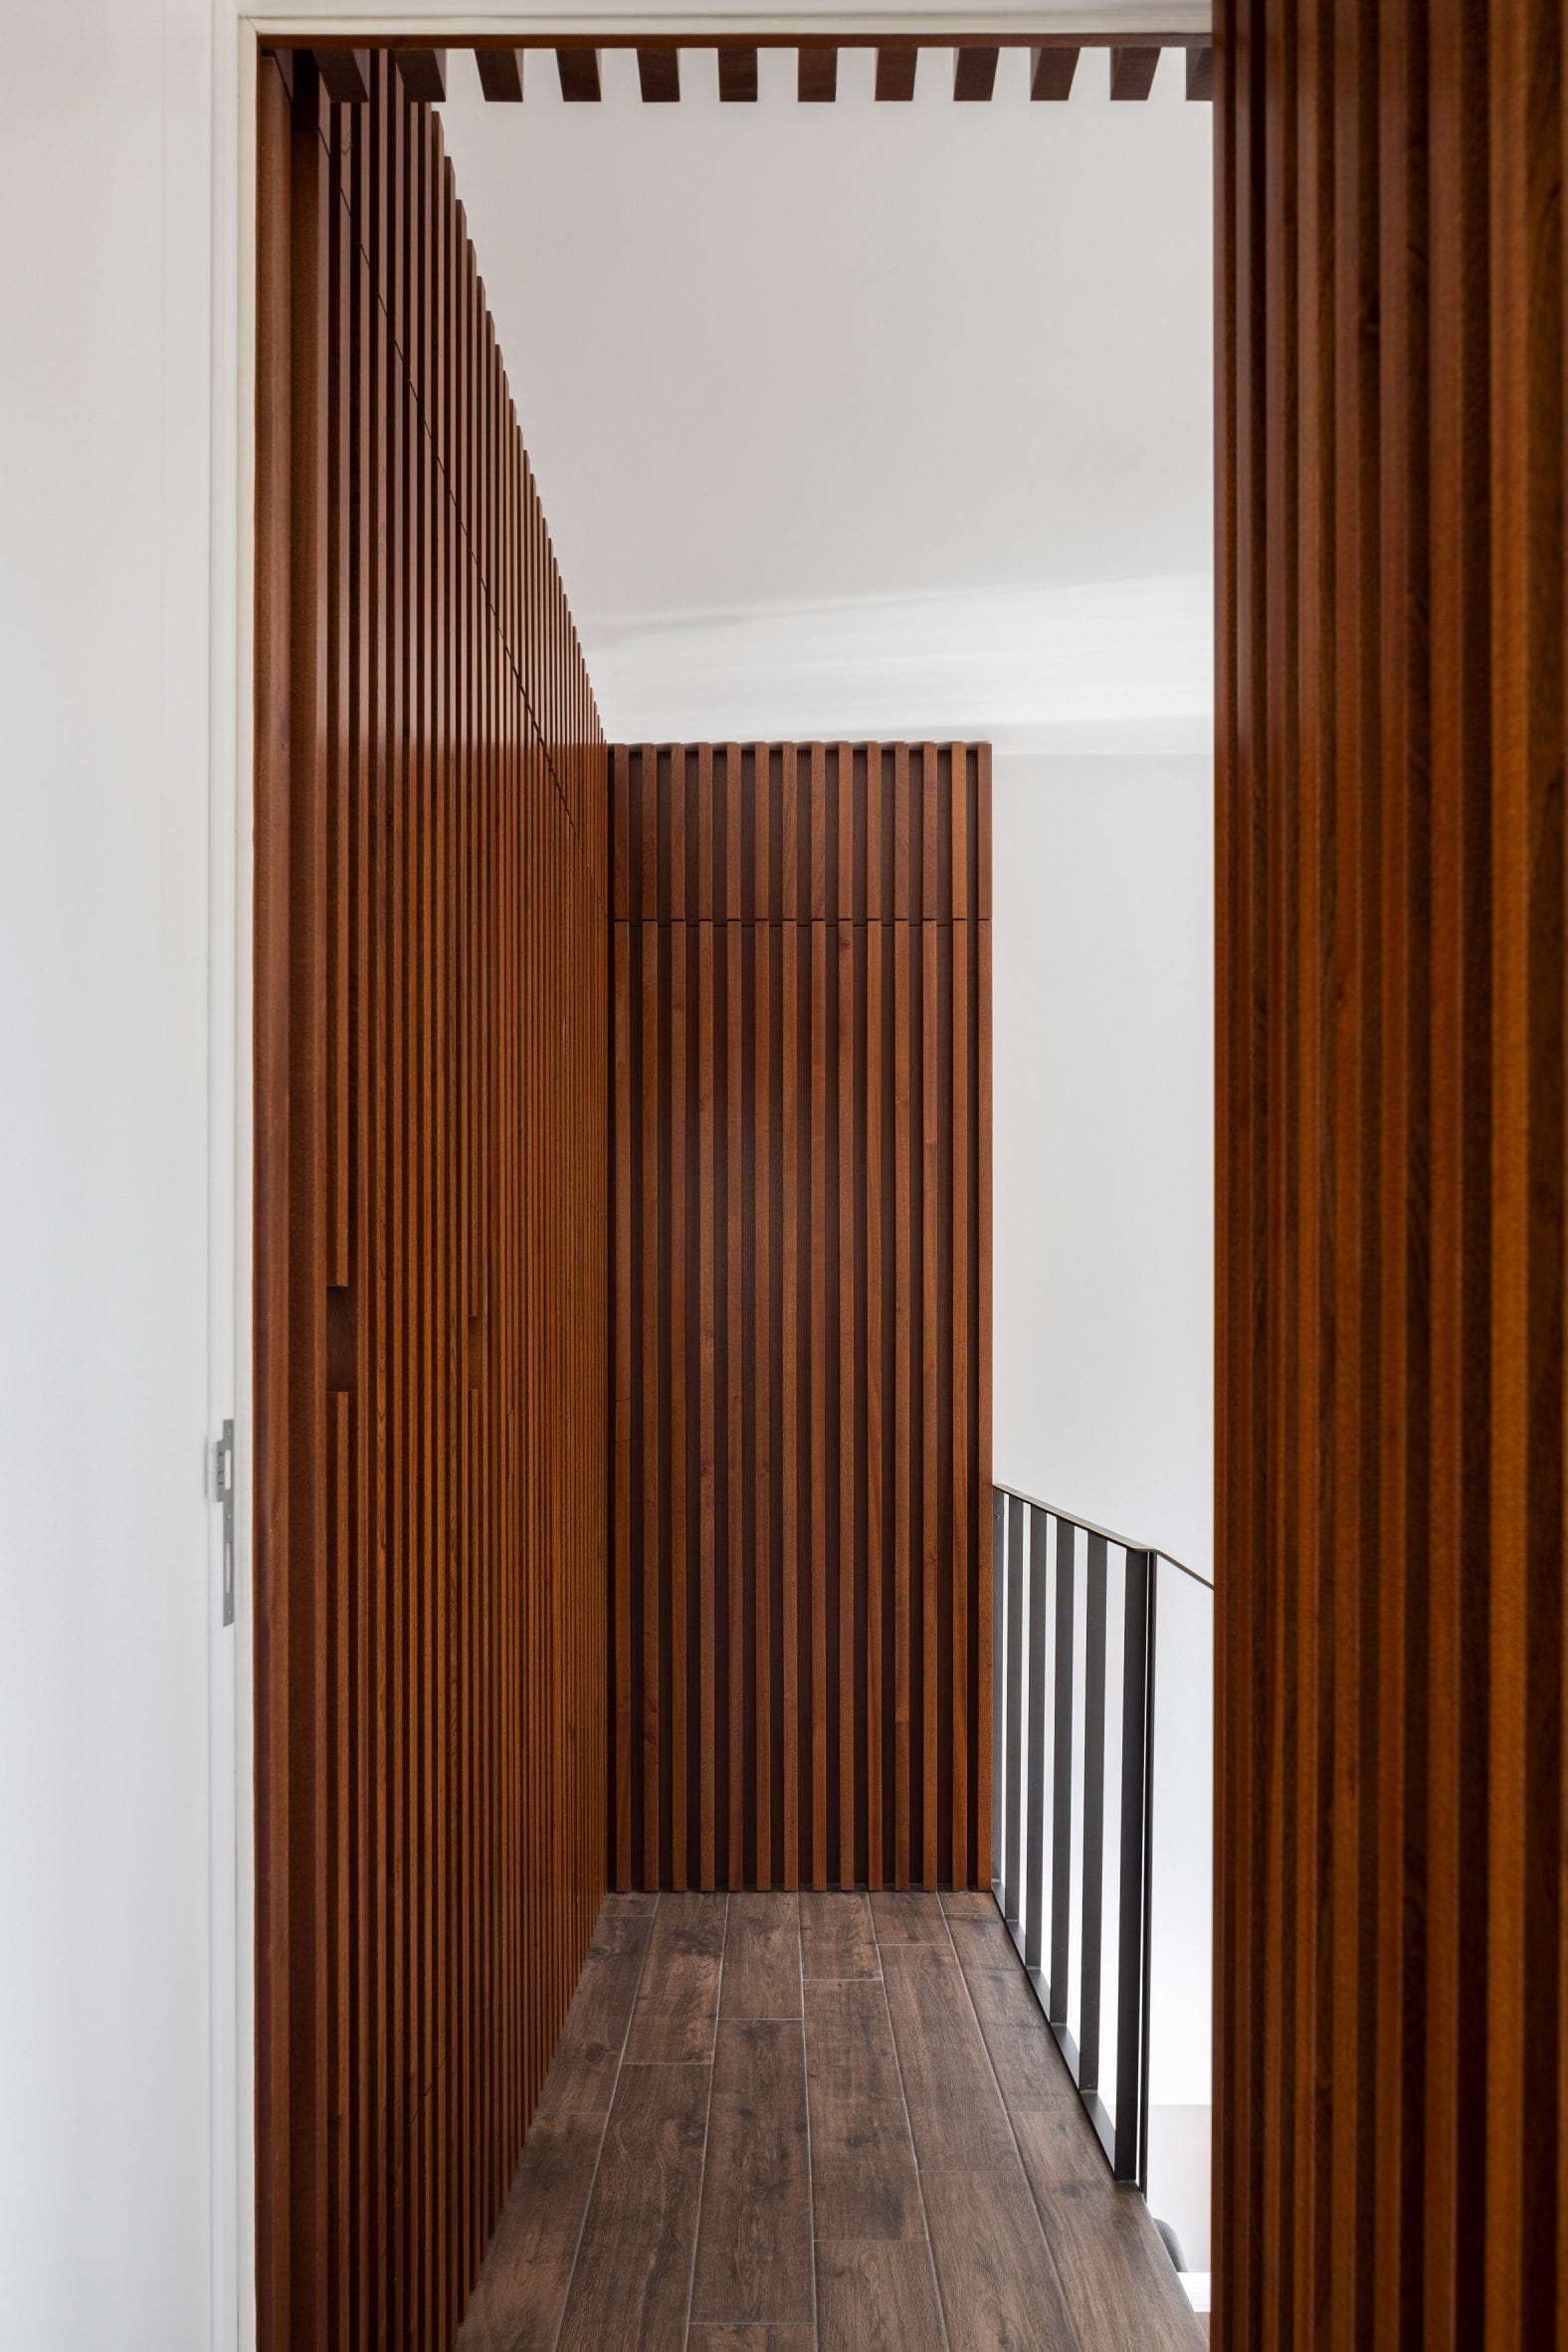 Stained wood was used throughout the home by Tiago Sousa